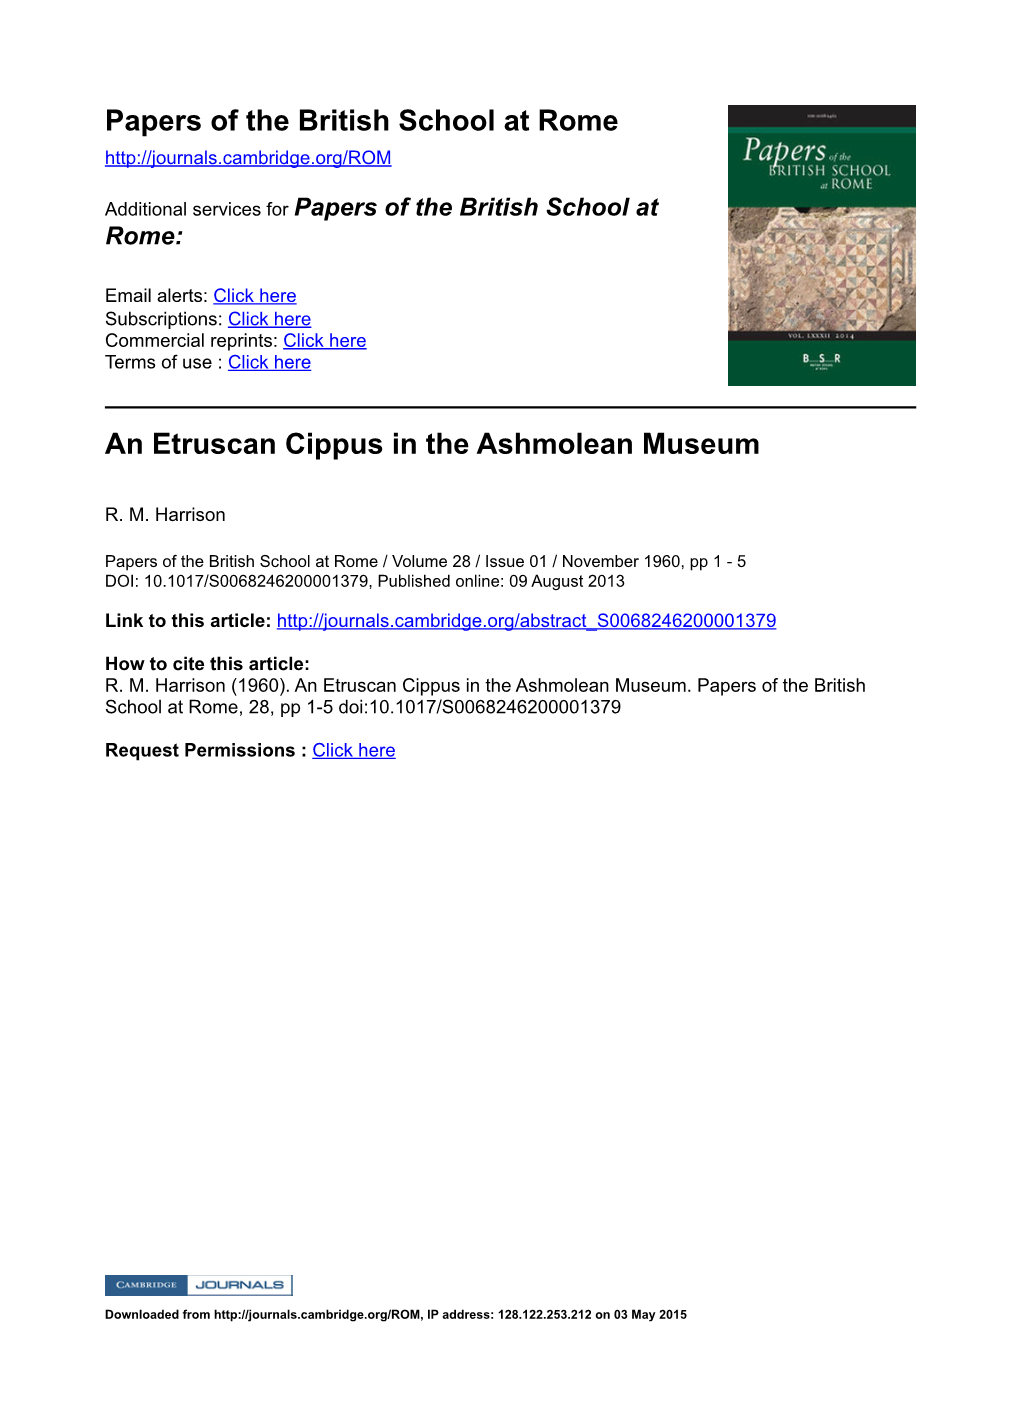 Papers of the British School at Rome an Etruscan Cippus in The